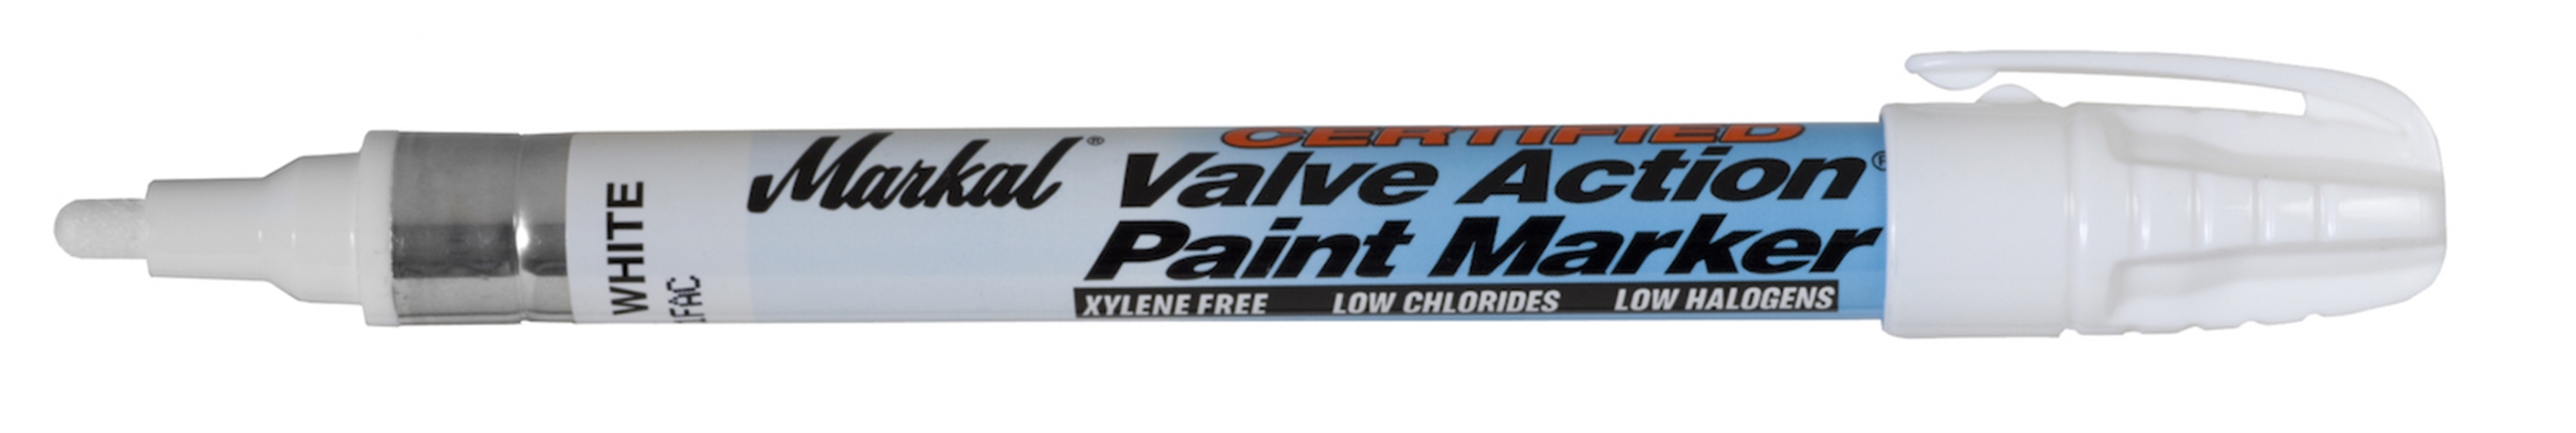 Certified Valve Action® Paint Marker White